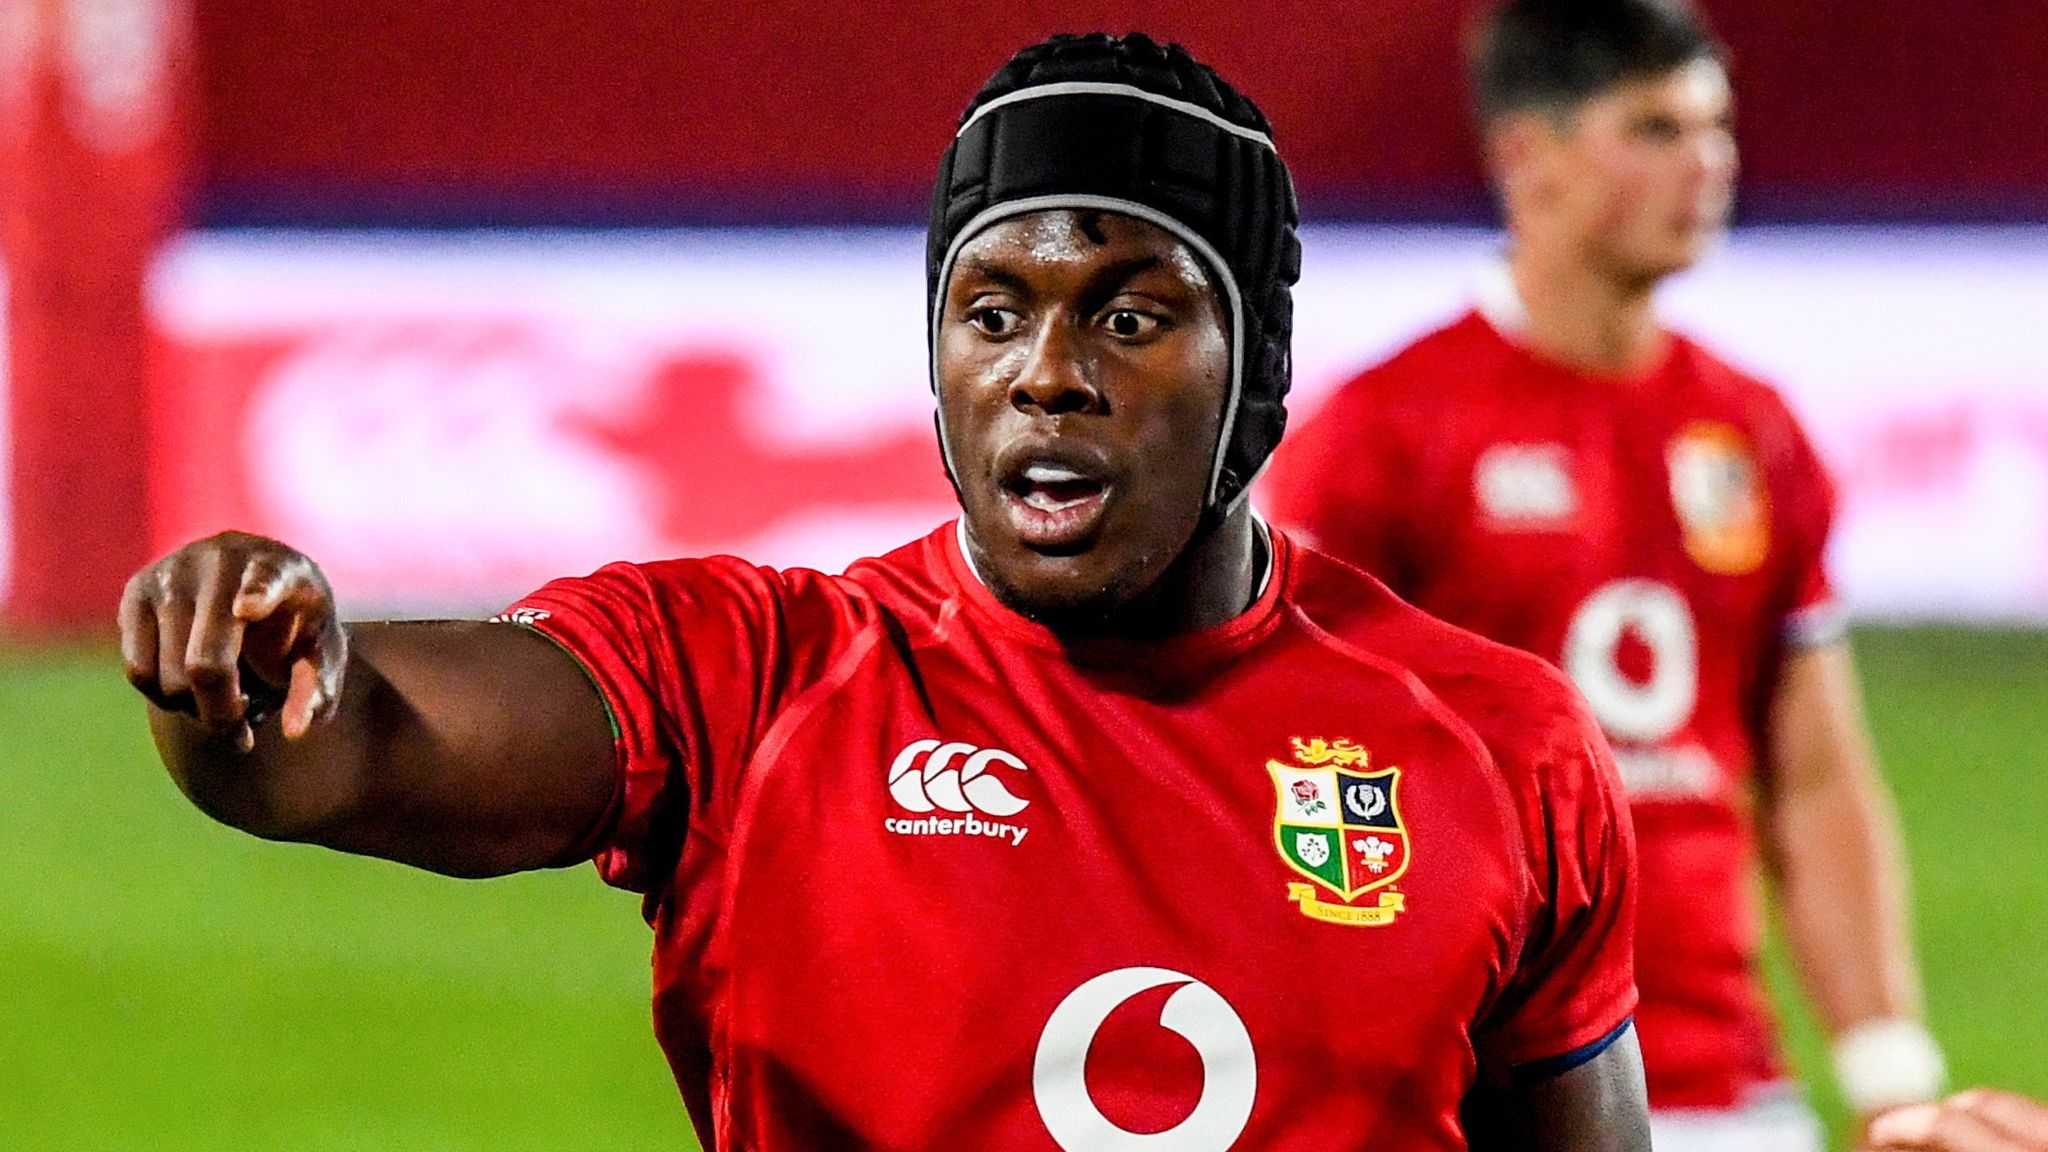 Maro Itoje tells Premiership Rugby: Give us a reason to stay in England